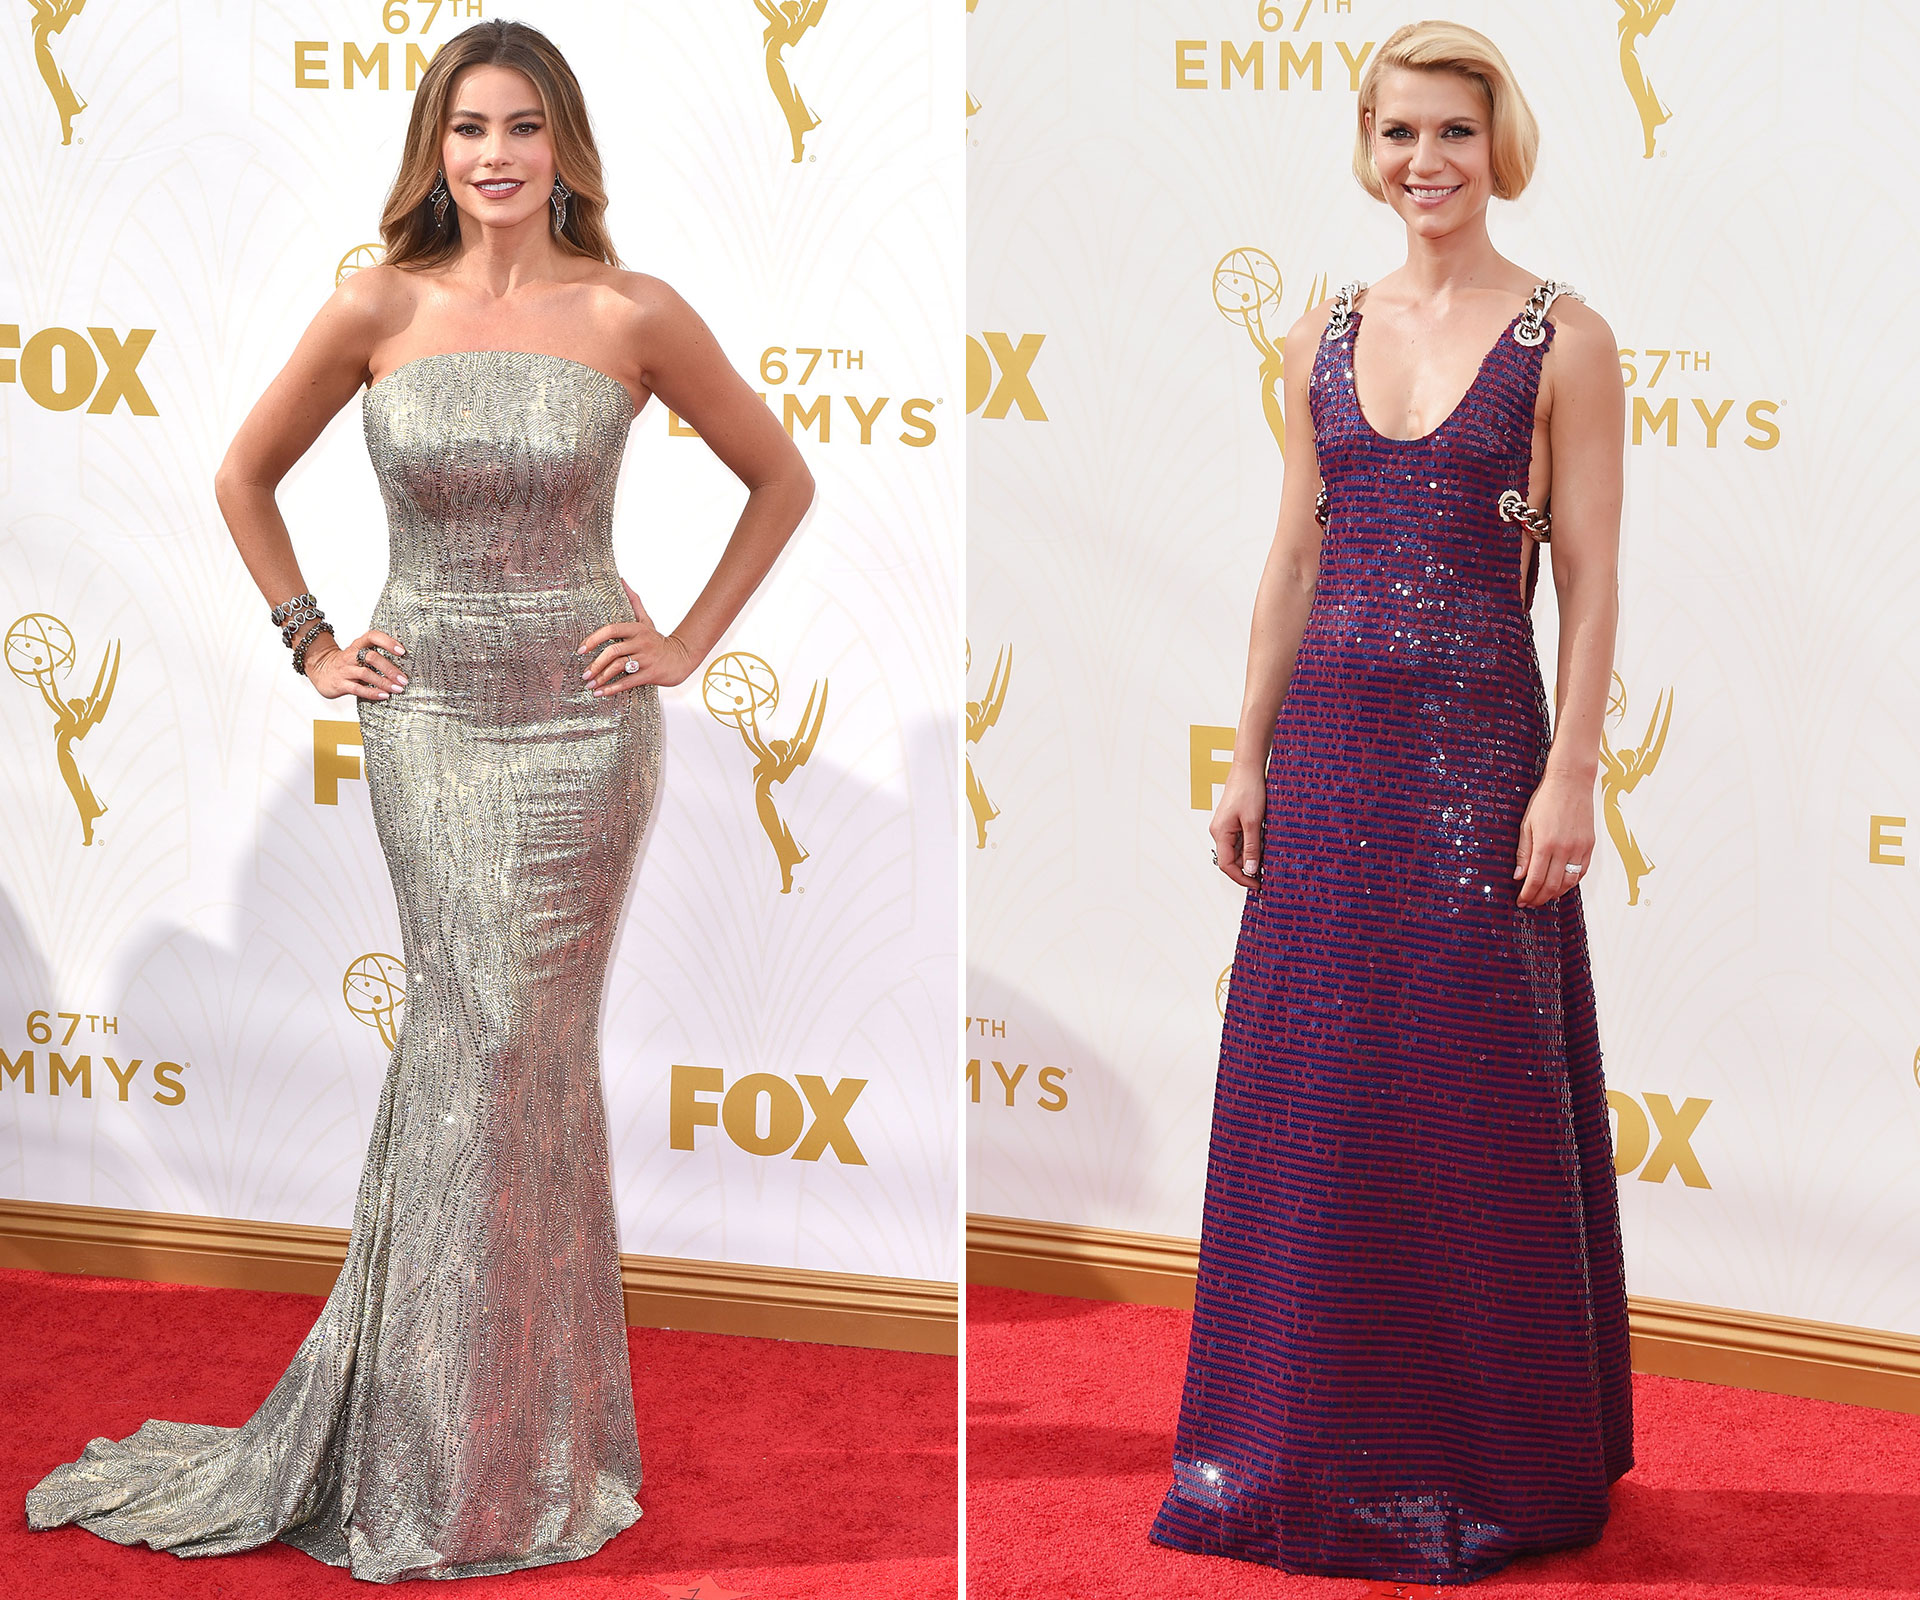 Best-dressed at the 2015 Emmy Awards